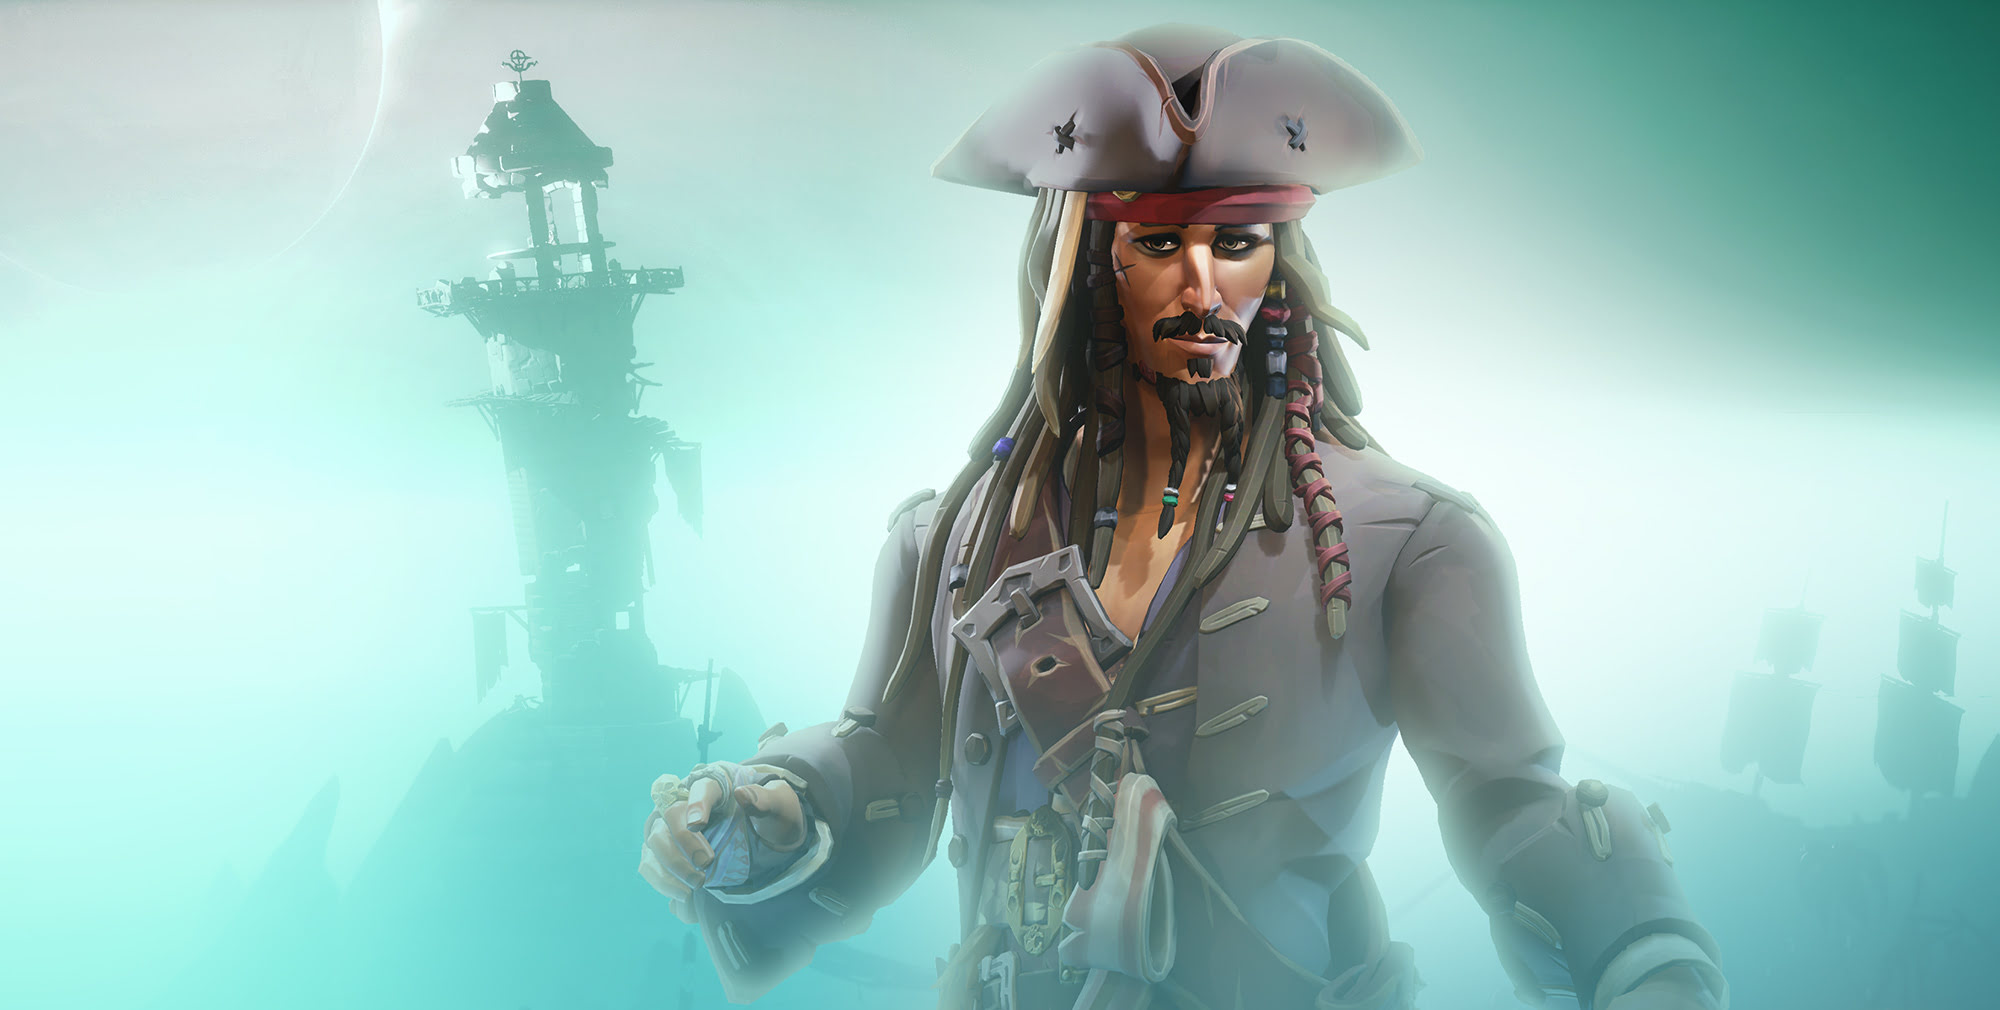 Capitan Jack Sparrow in A Pirate's Life.